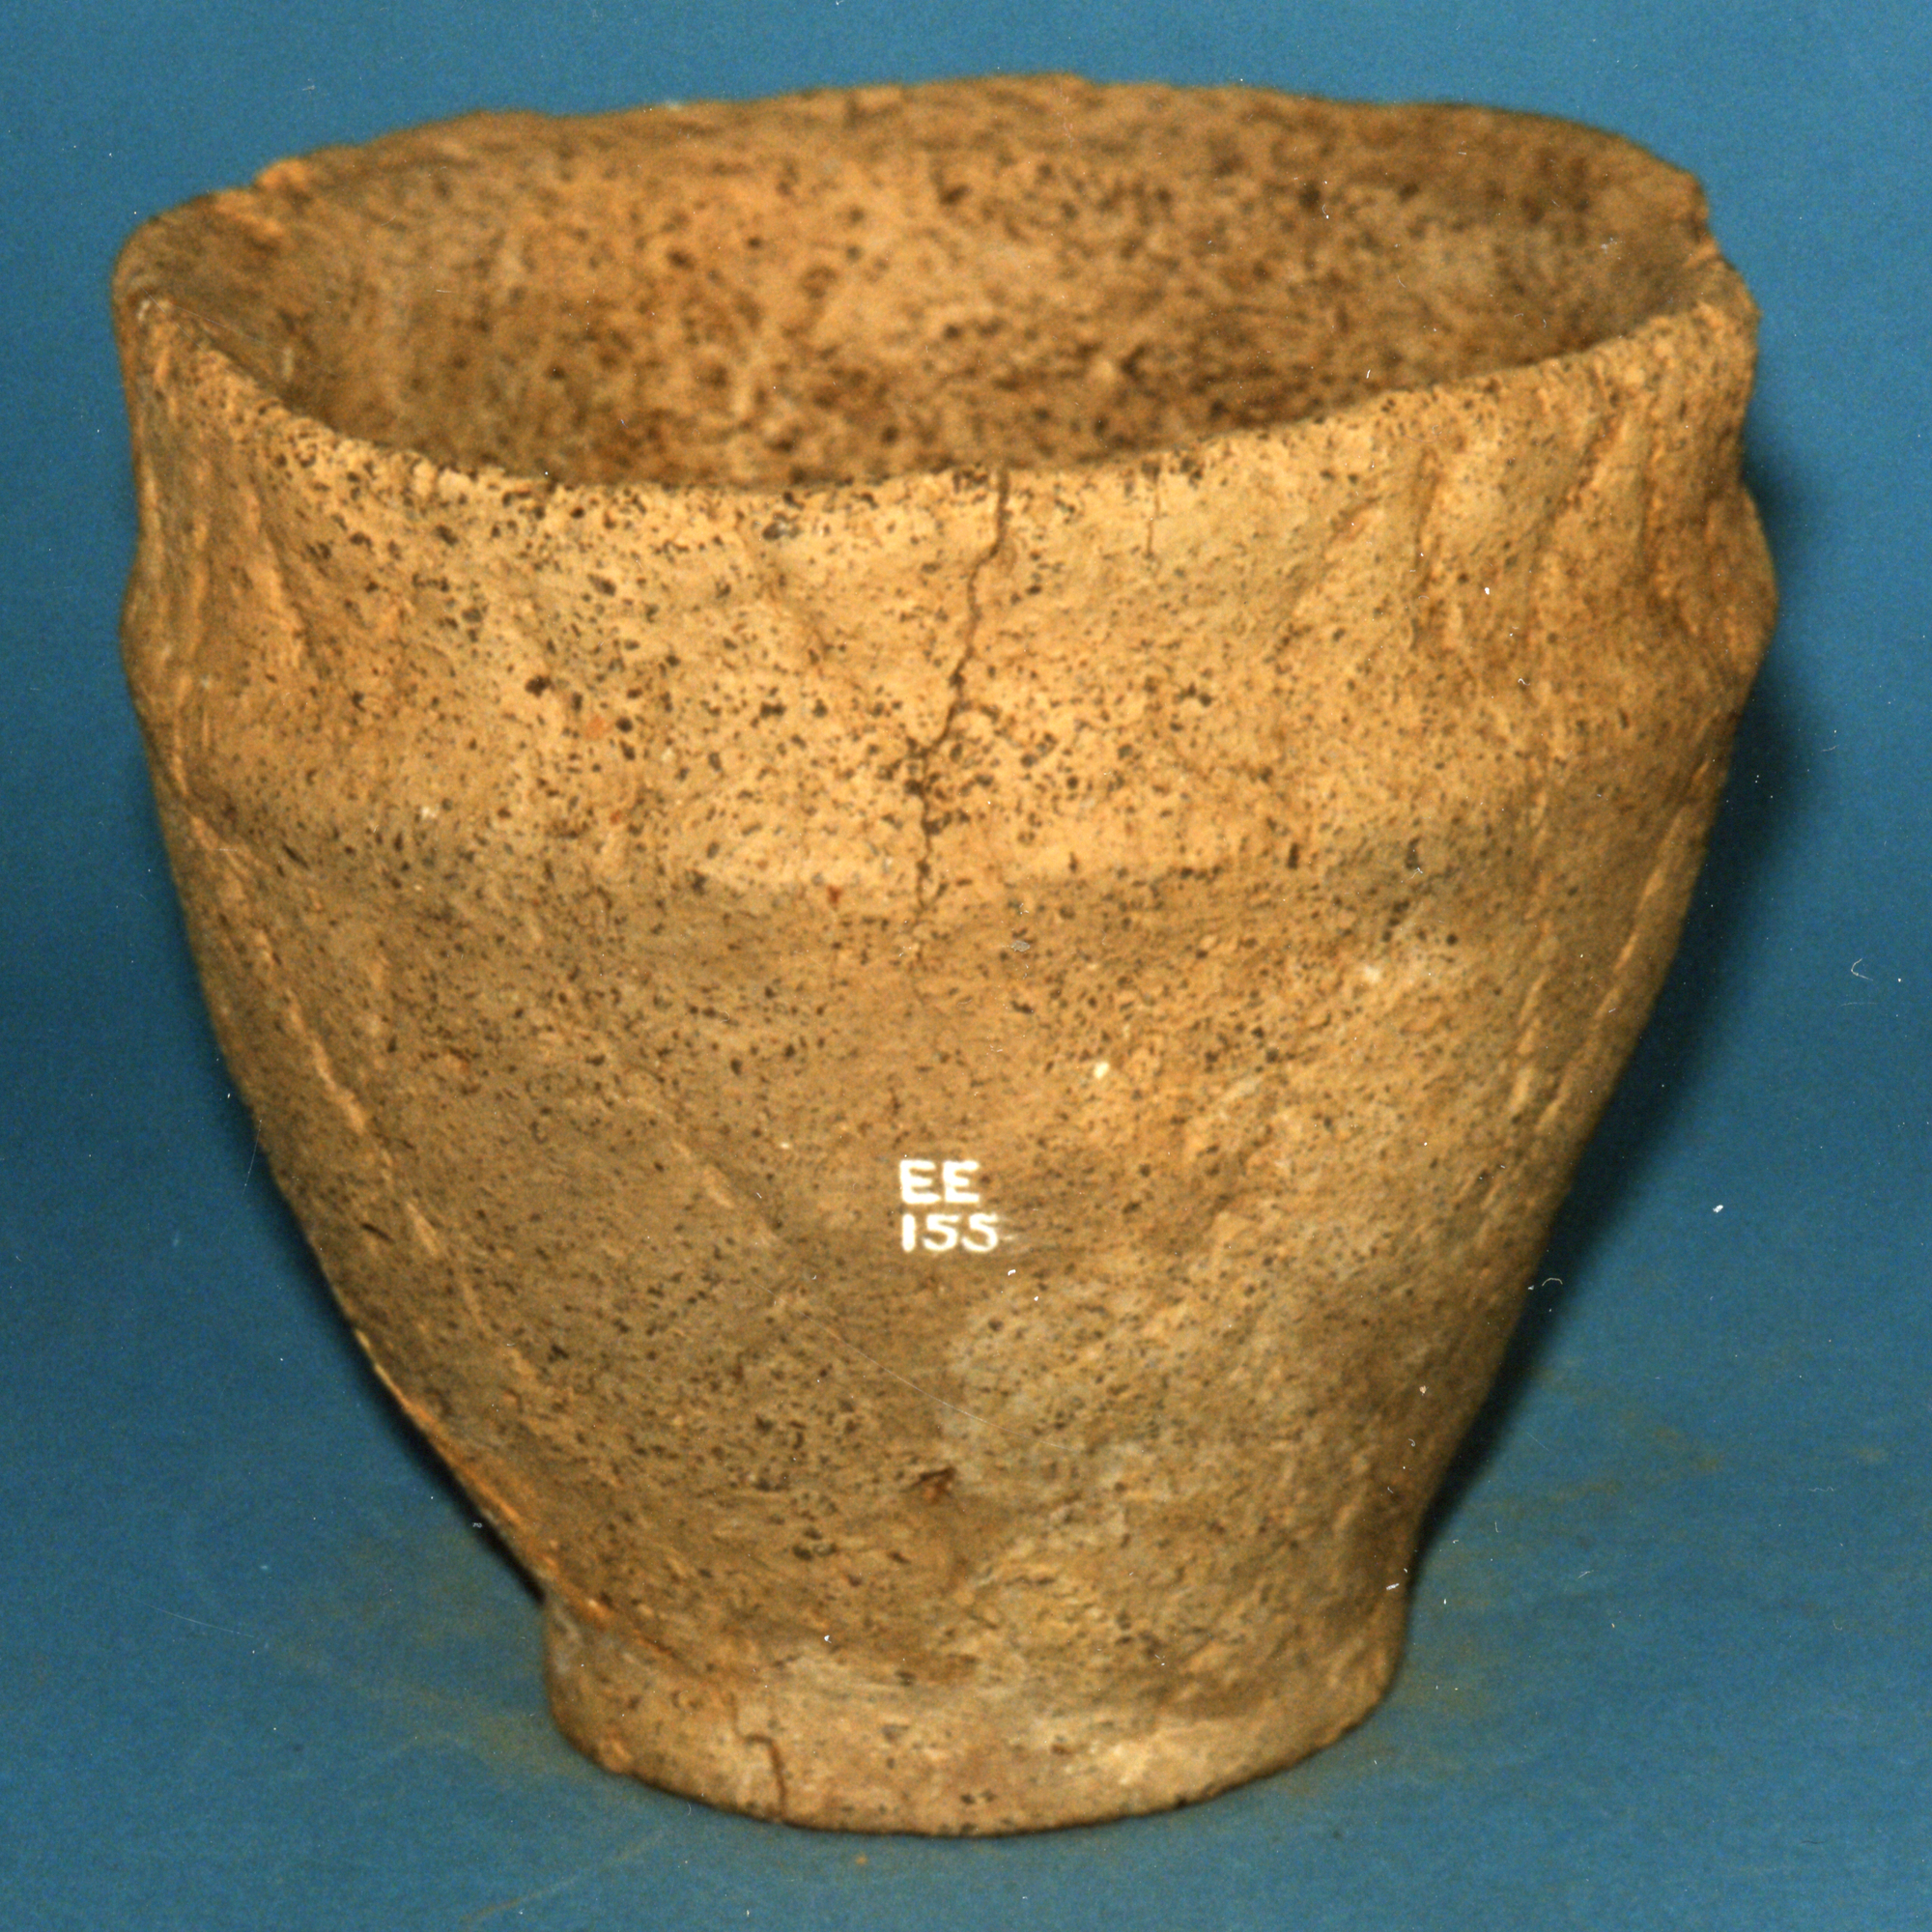 Image of Pottery food vessel from Cuninghar, Tillicoultry, Clackmannanshire © National Museums Scotland